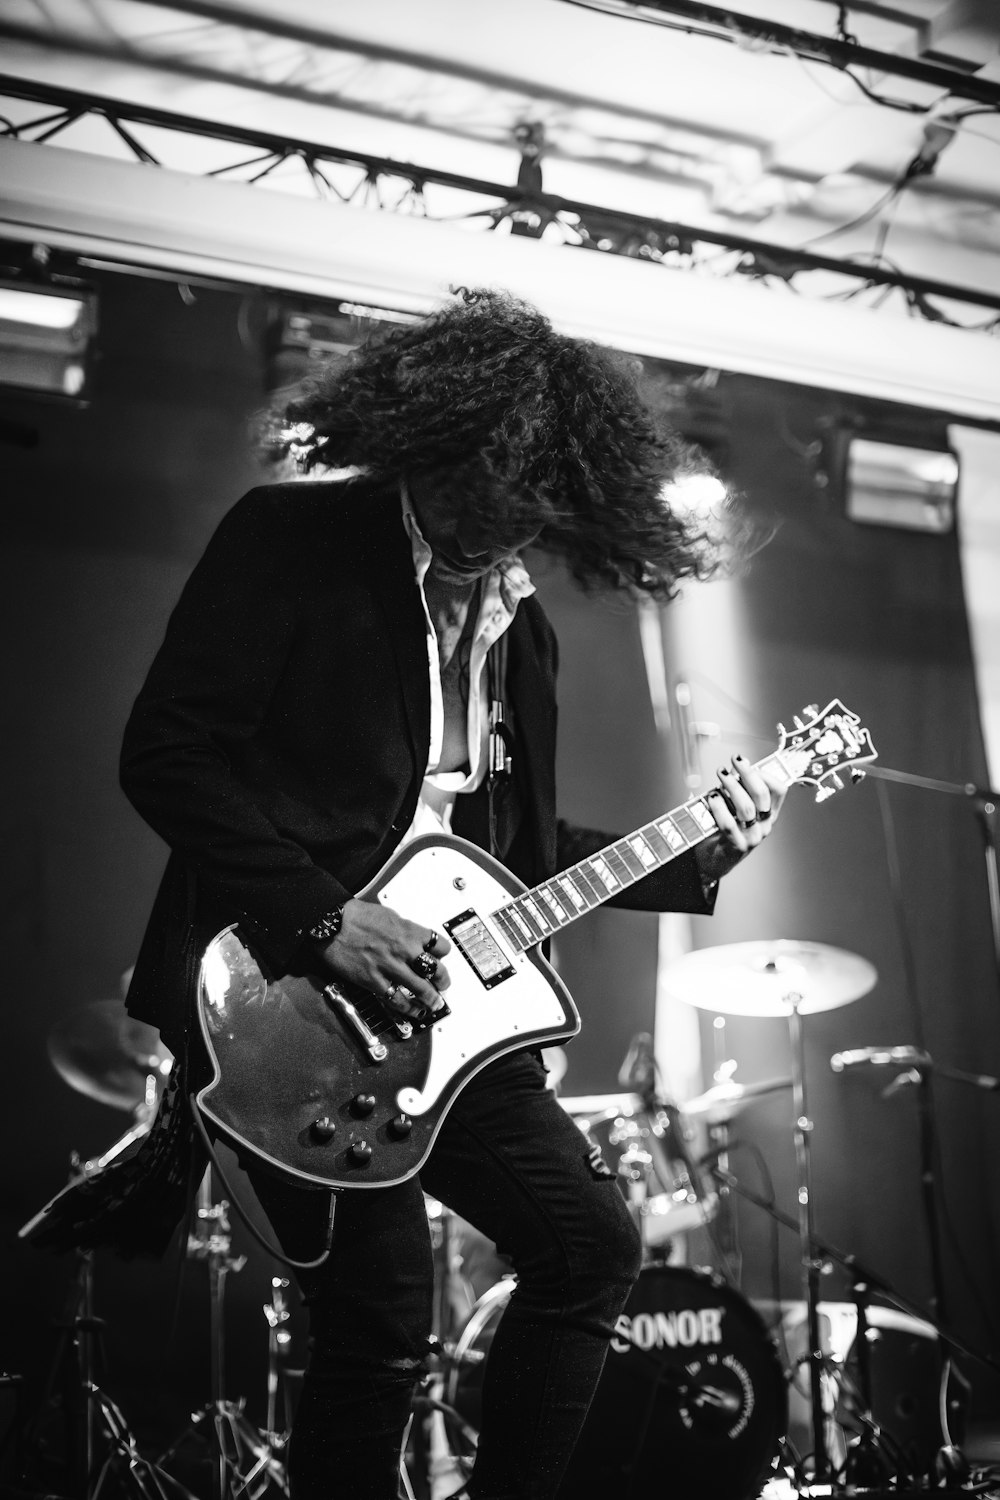 a black and white photo of a man playing a guitar